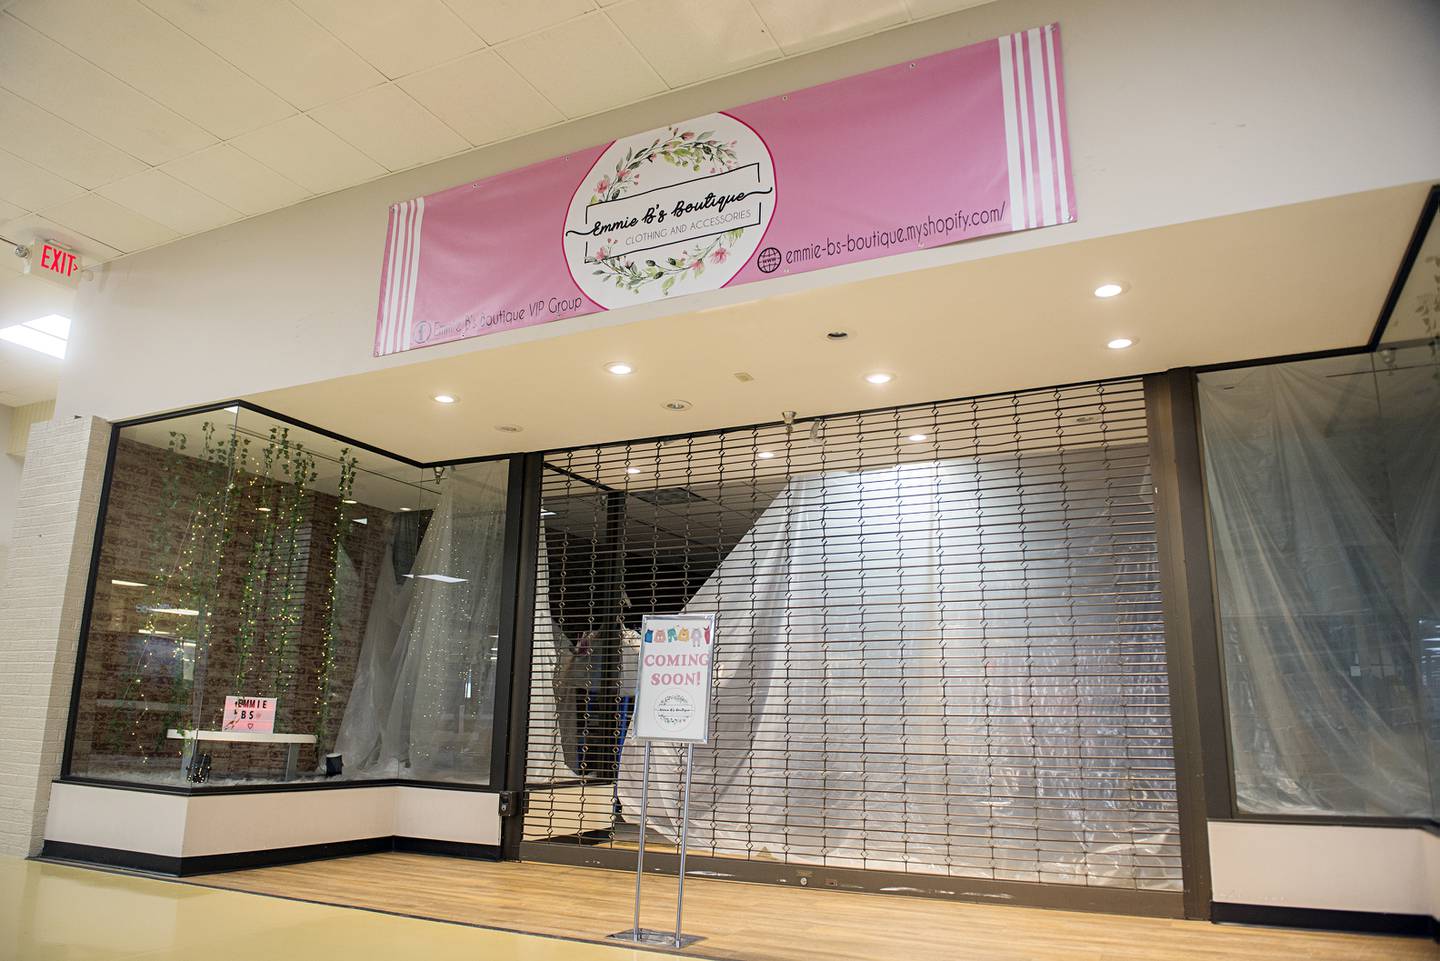 Many new businesses are popping up at the mall including a soon to open Emmie B's Boutique.